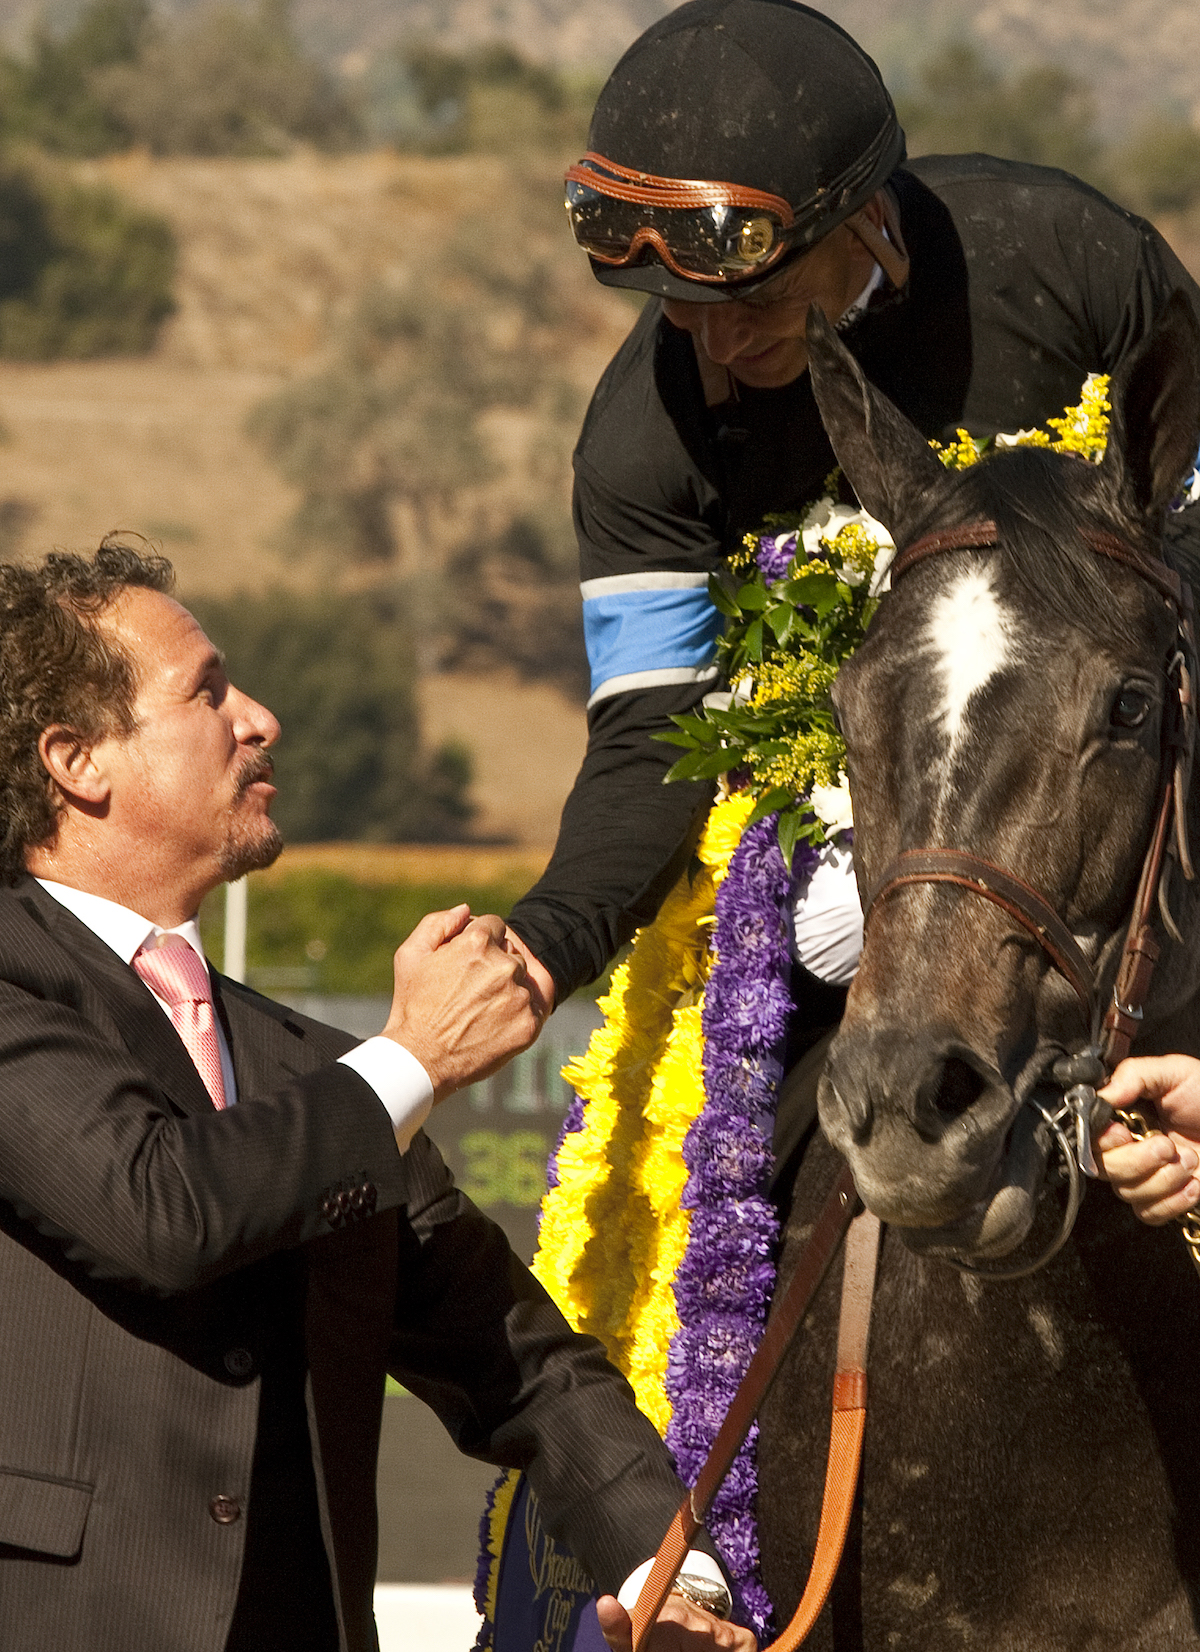 Jim Rome greets Mike Smith and Mizdirection as they enter the Breeders' Cup winner's circle. (Benoit photo)